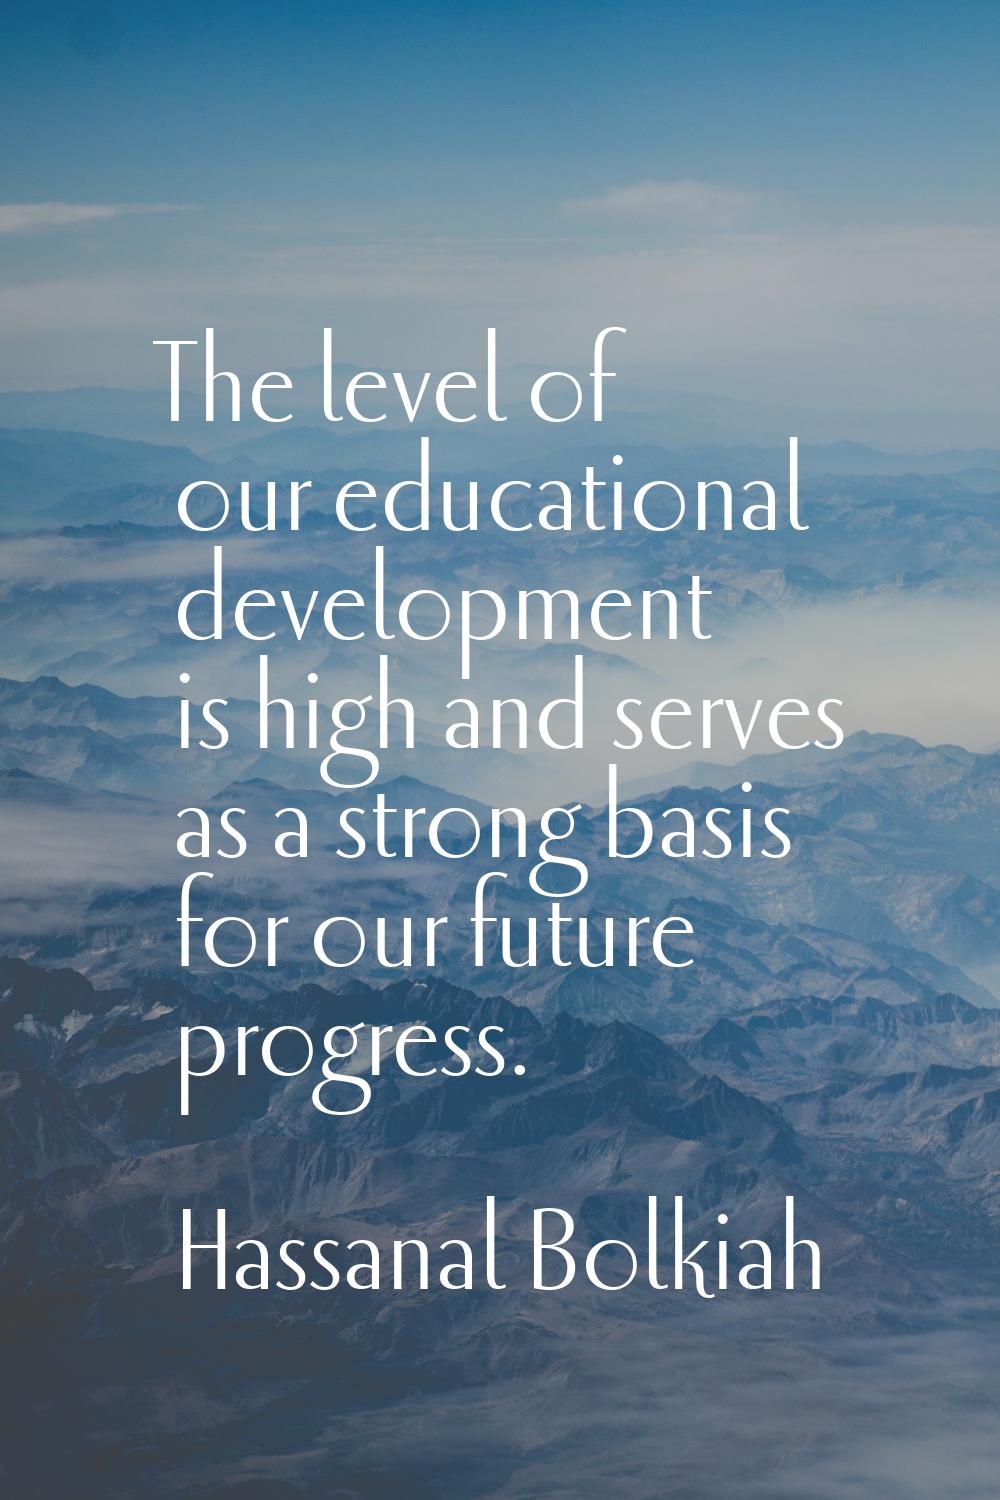 The level of our educational development is high and serves as a strong basis for our future progre